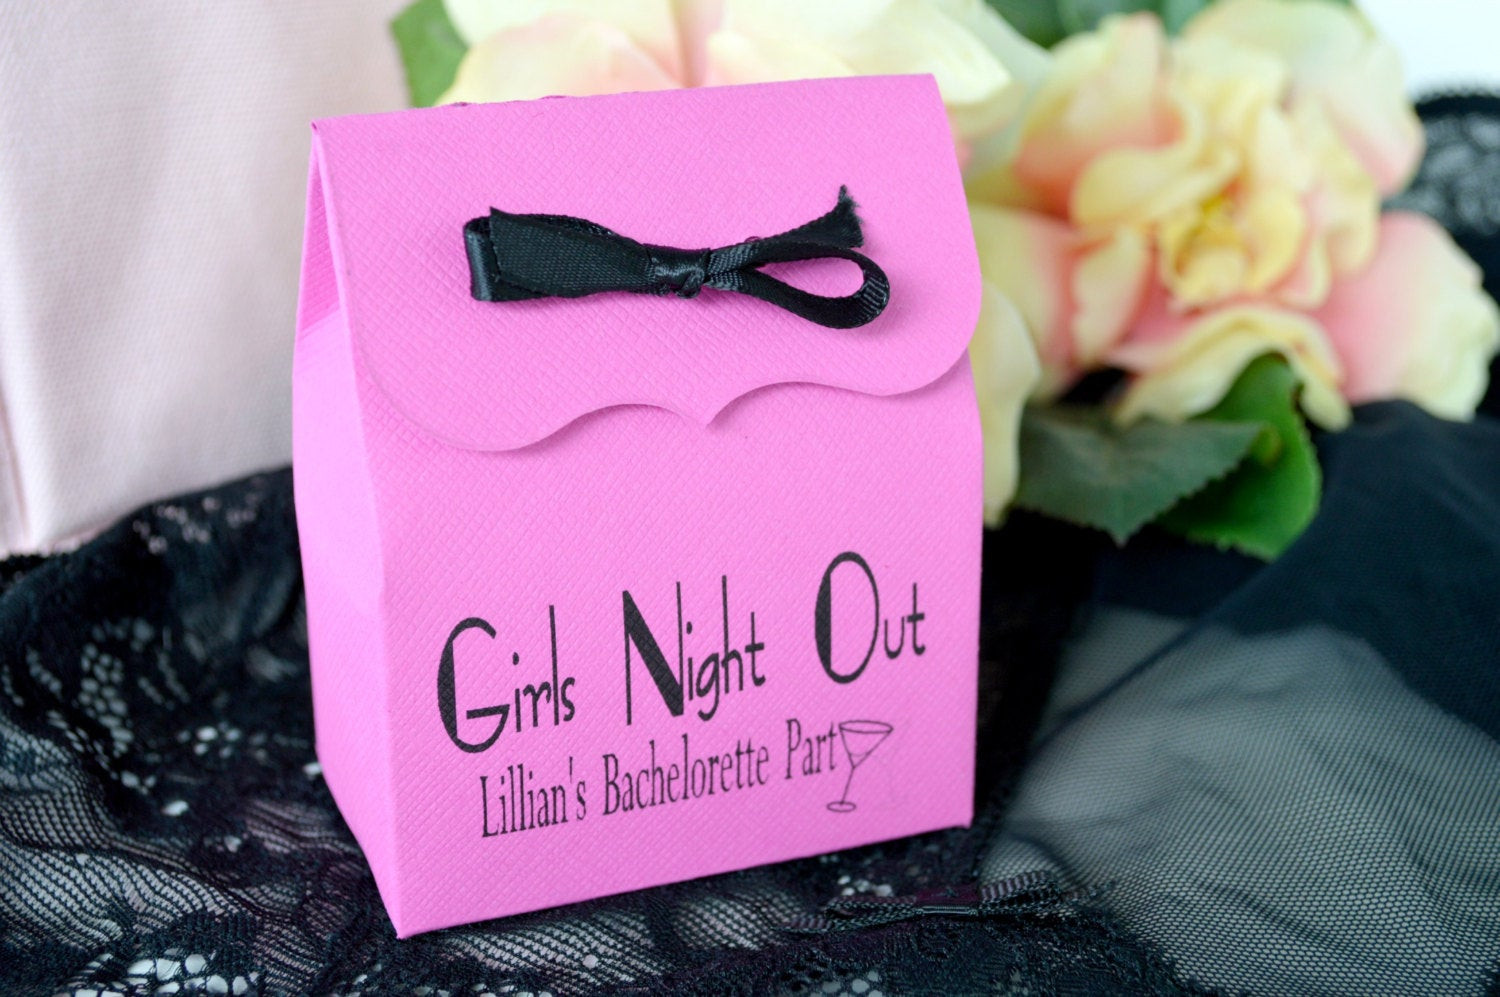 Bachelorette Party Gift Bag Ideas
 The Best Gift Bag Ideas for Bachelorette Party – Home